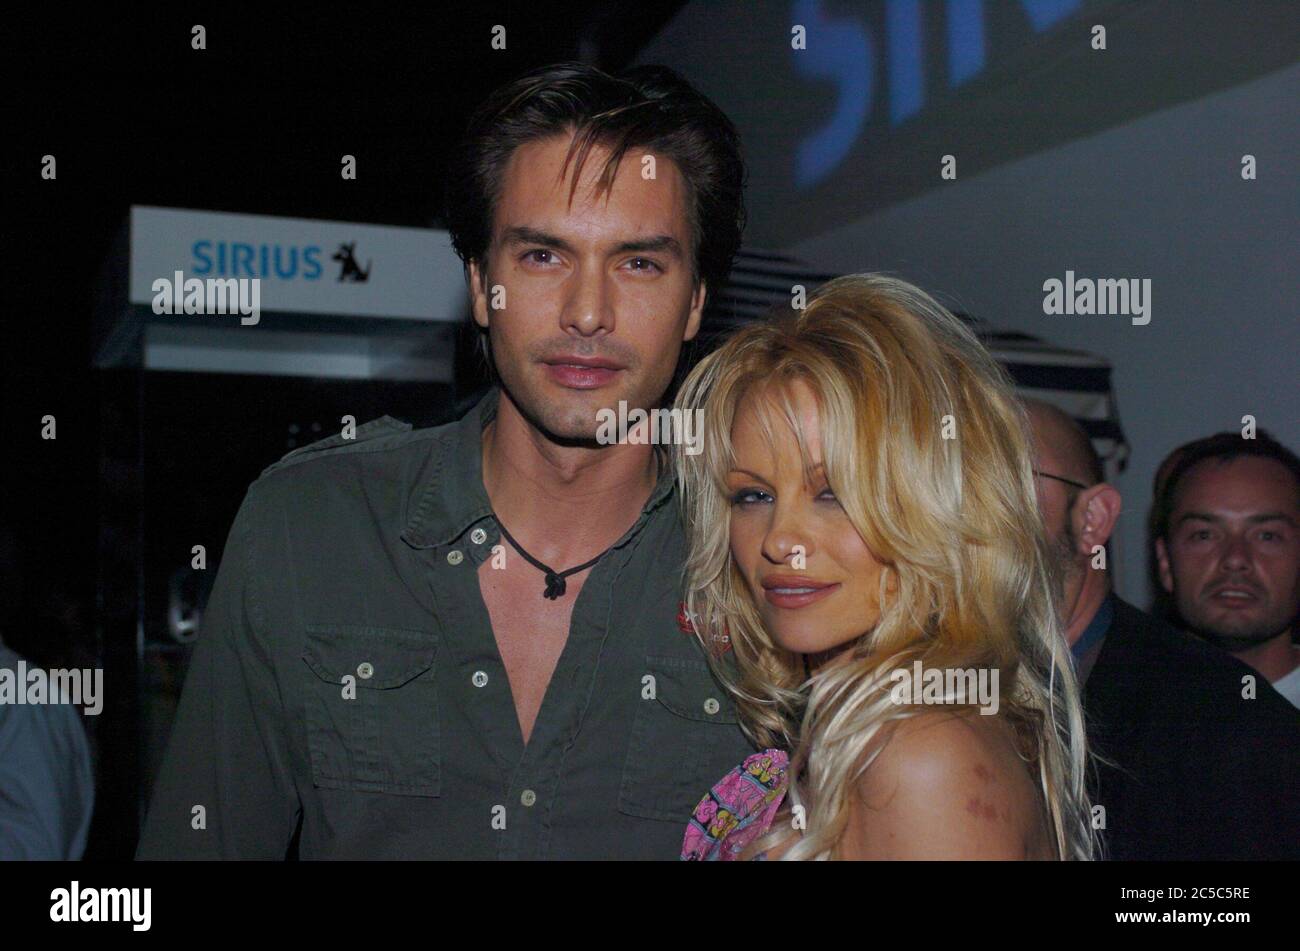 United States Of America. 19th Feb, 2004. MIAMI BEACH, FL - FEBRUARY 19: Pamela Anderson and male super model Marcus Schenkenberg on February 19, 2004 in Miami, Florida People: Pamela Anderson, Marcus Schenkenberg Credit: Storms Media Group/Alamy Live News Stock Photo